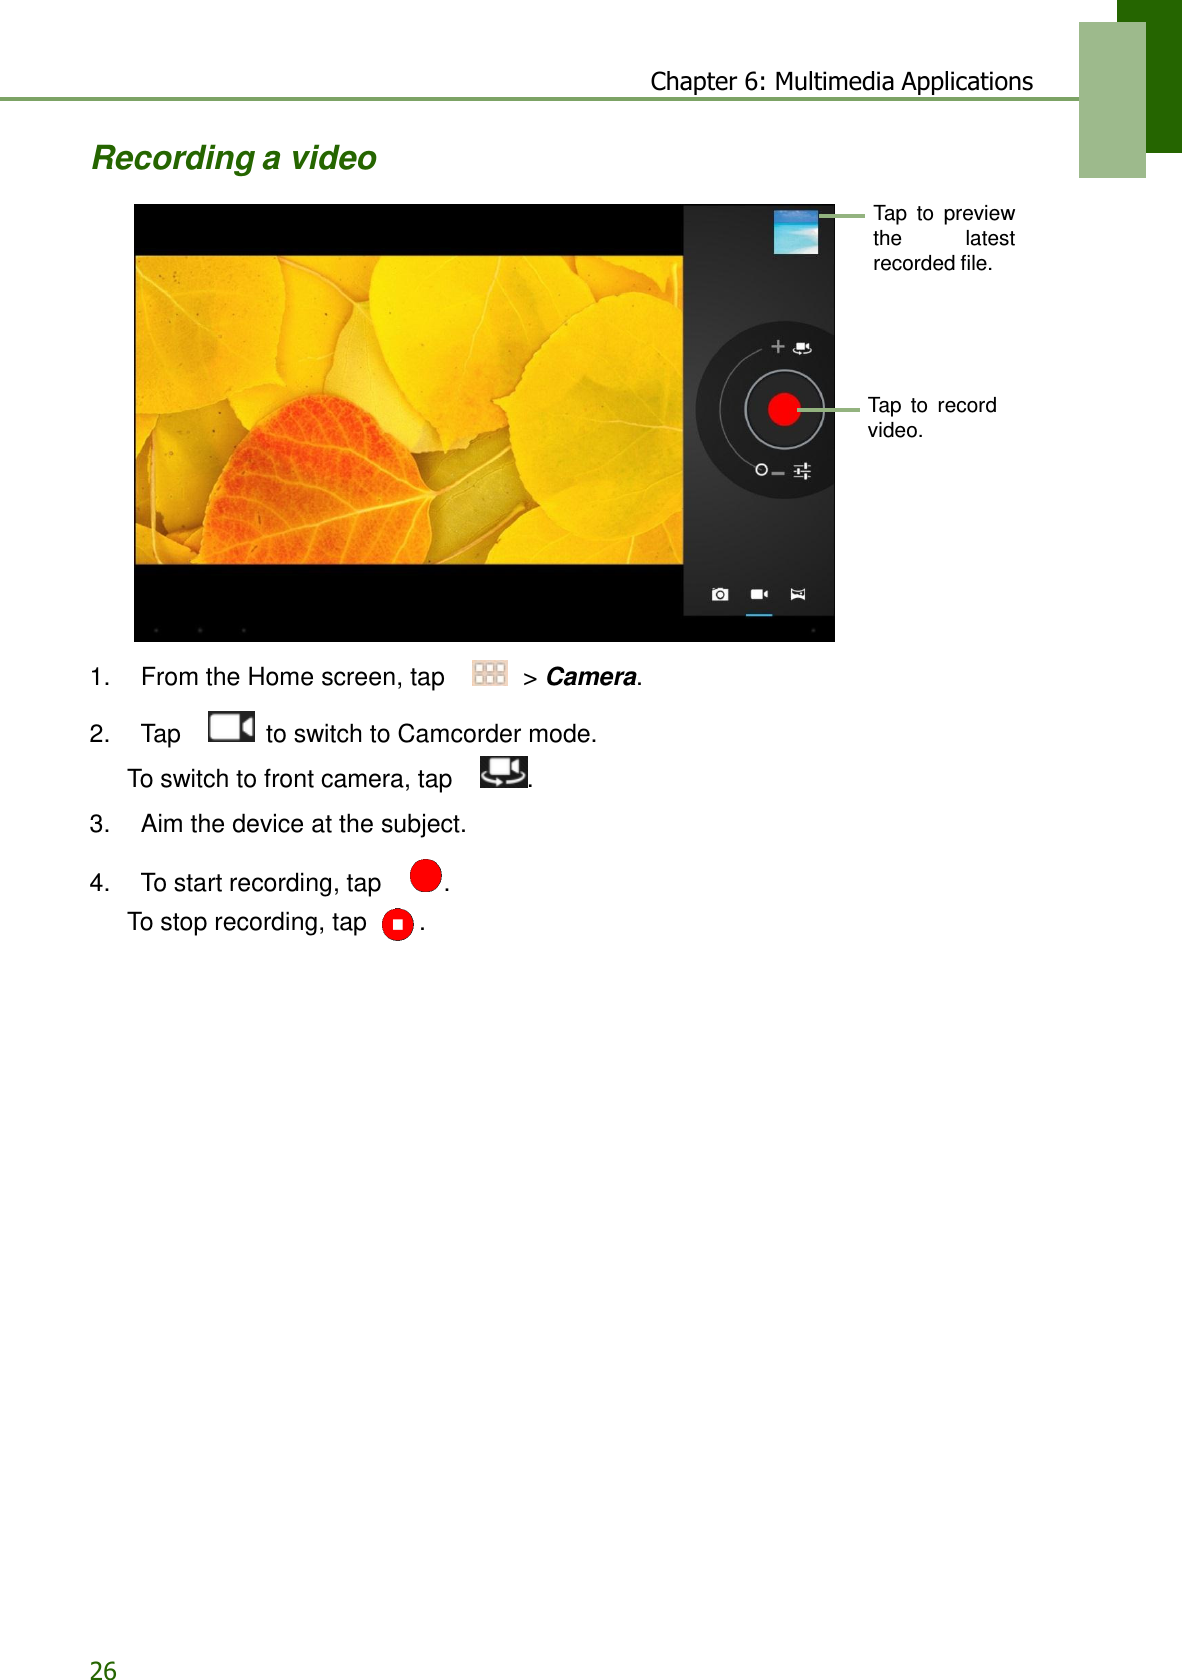 26 Chapter 6: Multimedia Applications   Recording a video  Tap  to  preview the  latest recorded file.      Tap  to  record video.           1.    From the Home screen, tap     &gt; Camera.  2.    Tap     to switch to Camcorder mode. To switch to front camera, tap    .  3.    Aim the device at the subject.  4.    To start recording, tap     .  To stop recording, tap  . 